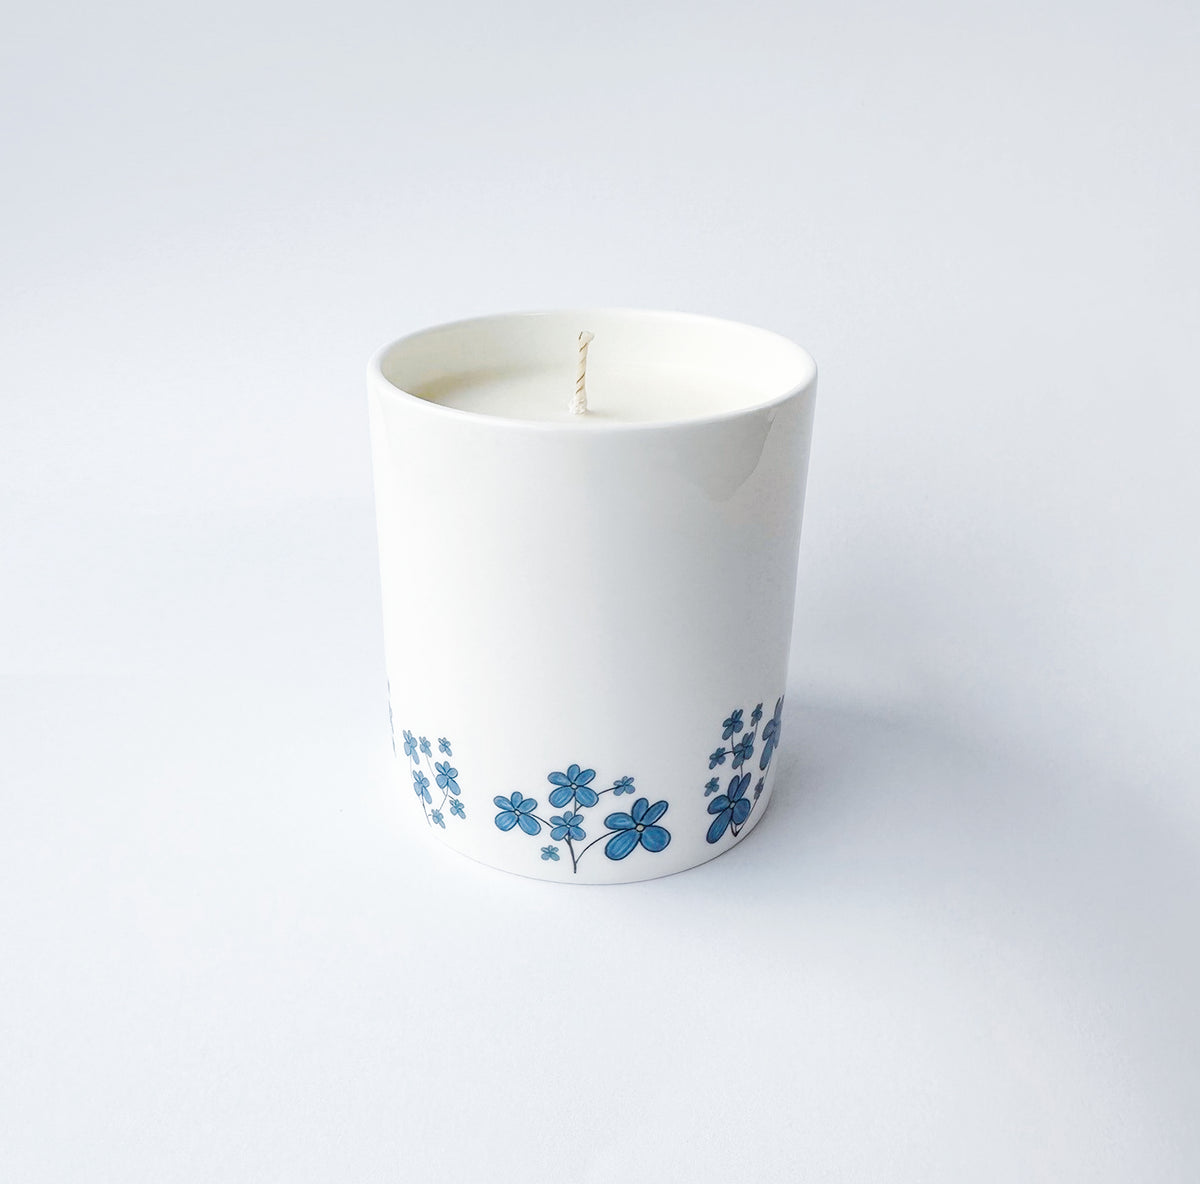 Forget-me-not candle